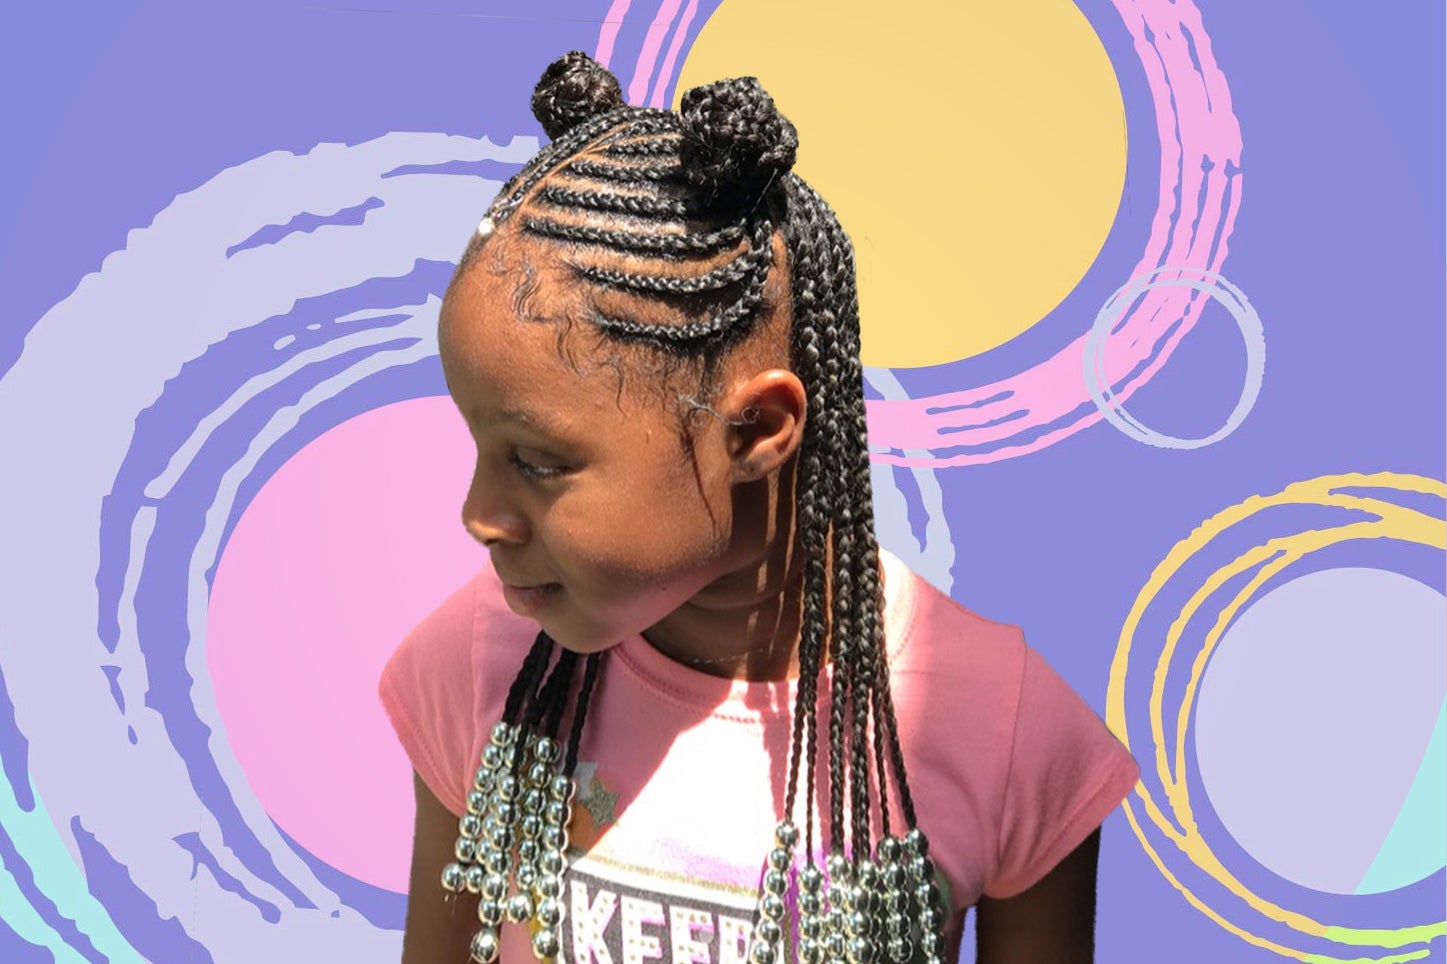 Braids for kids cute hairstyles for children for every occasion  Legitng